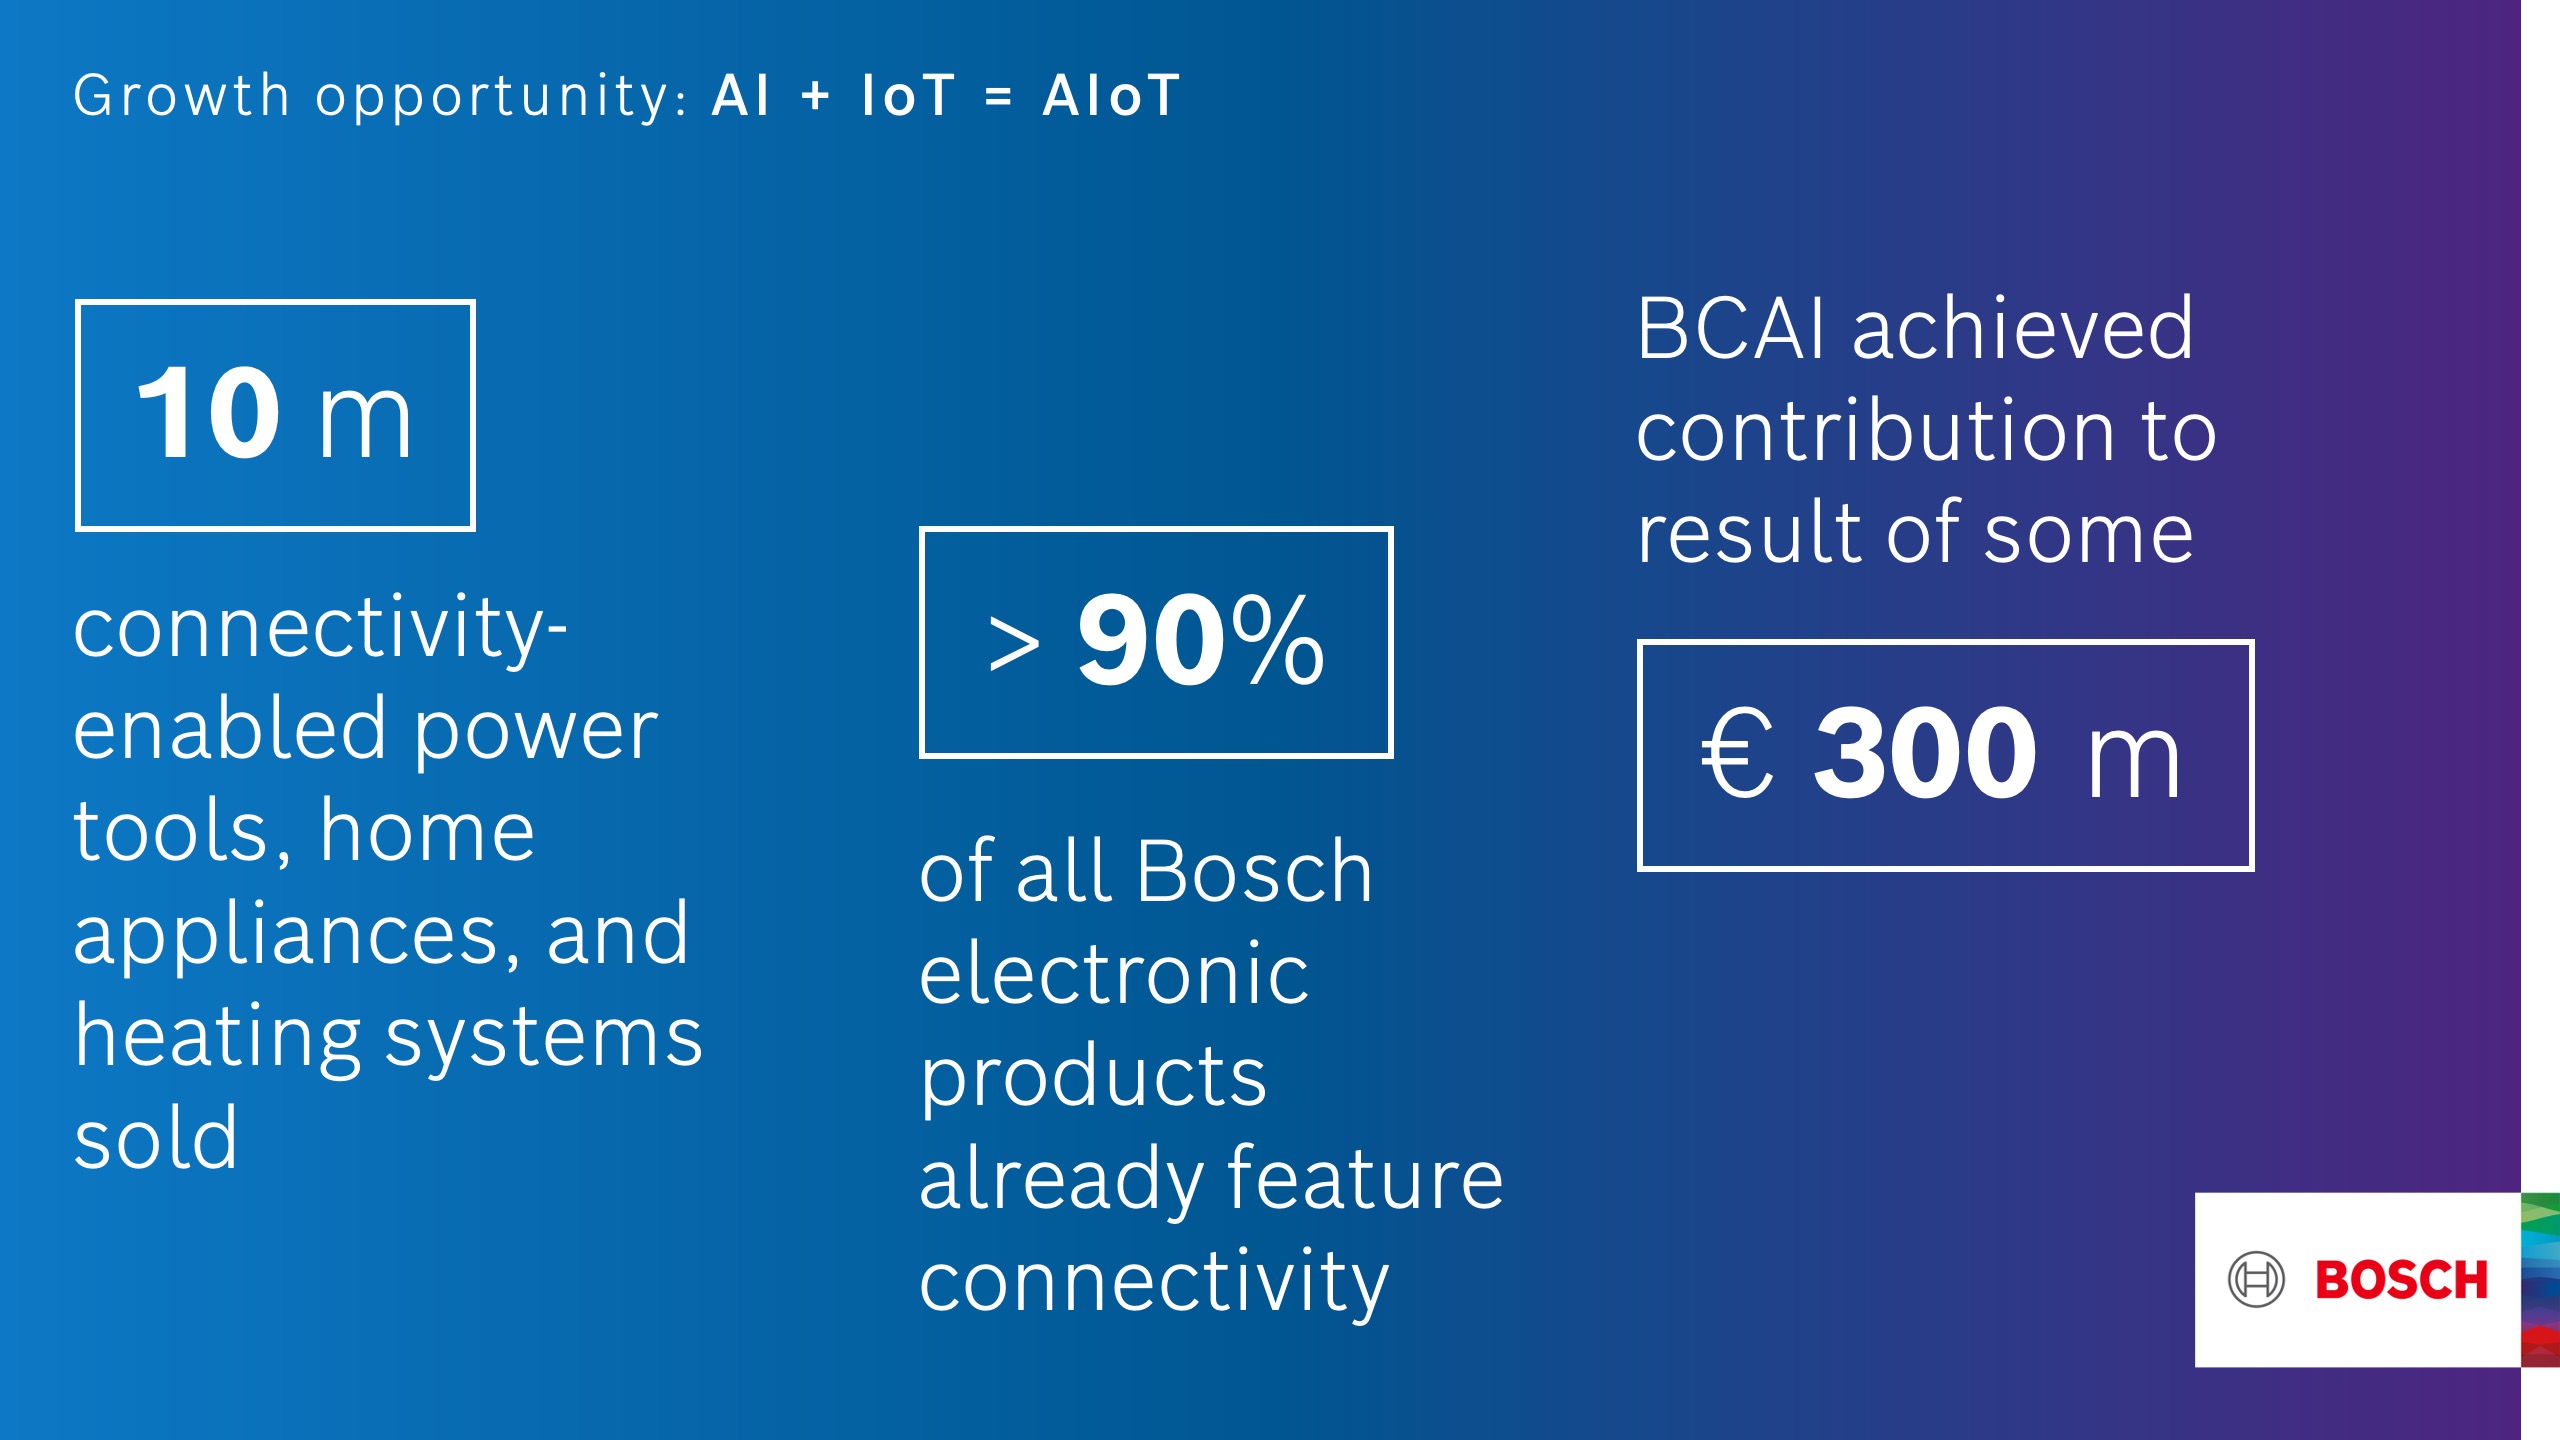 Bosch: growth opportunities in artificial intelligence and the internet of things